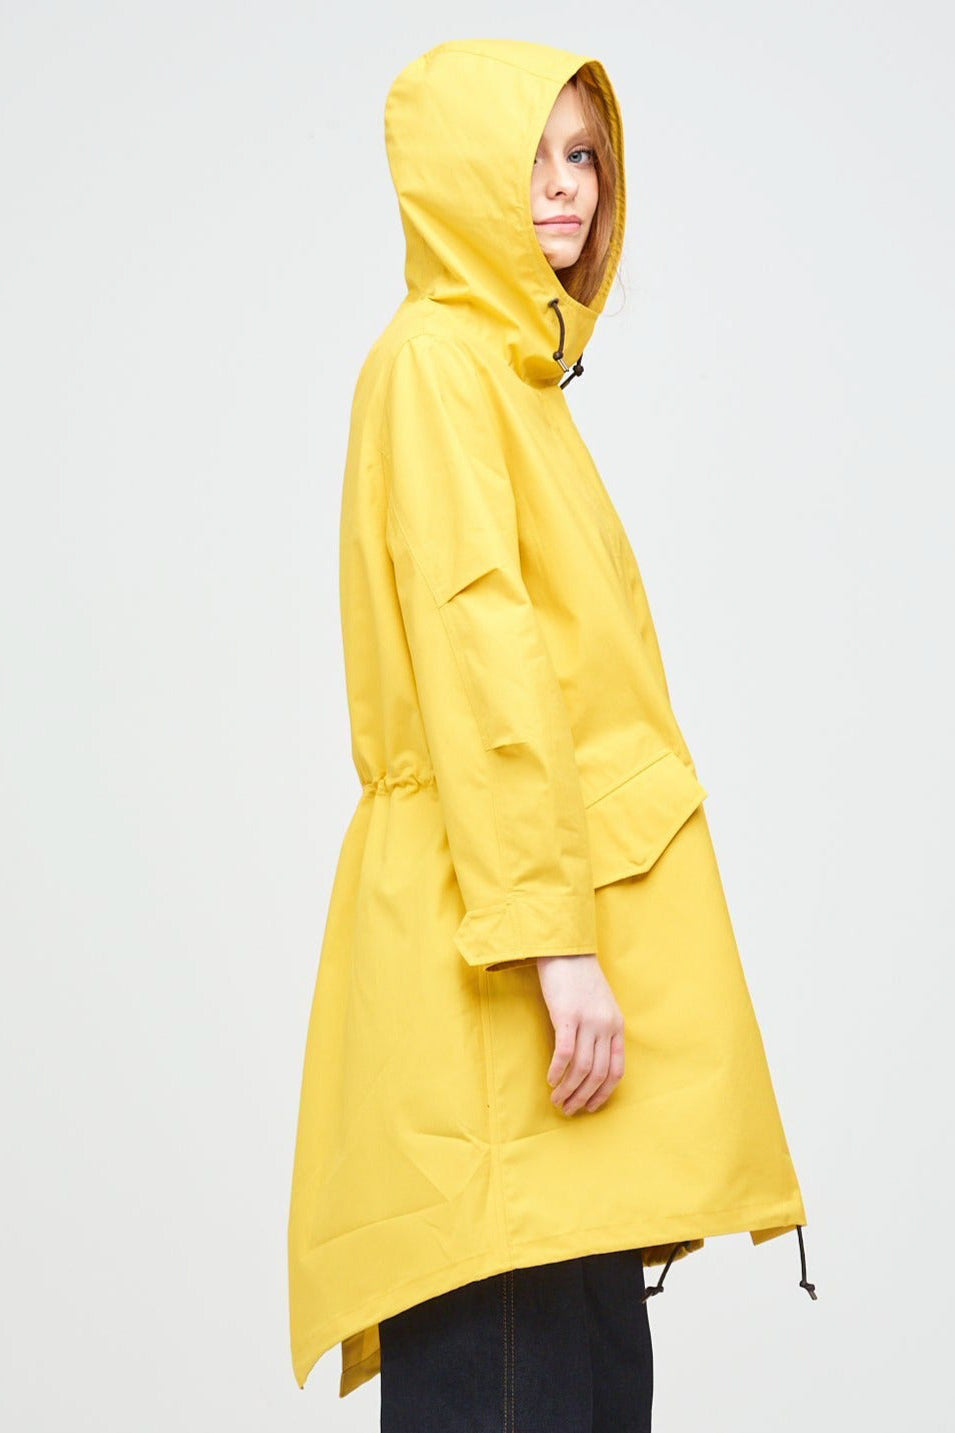 
            Side shot of a young, white female model with ginger hair wearing long yellow parka with the hood up. The parka is styled with indigo jeans and a white trainer.